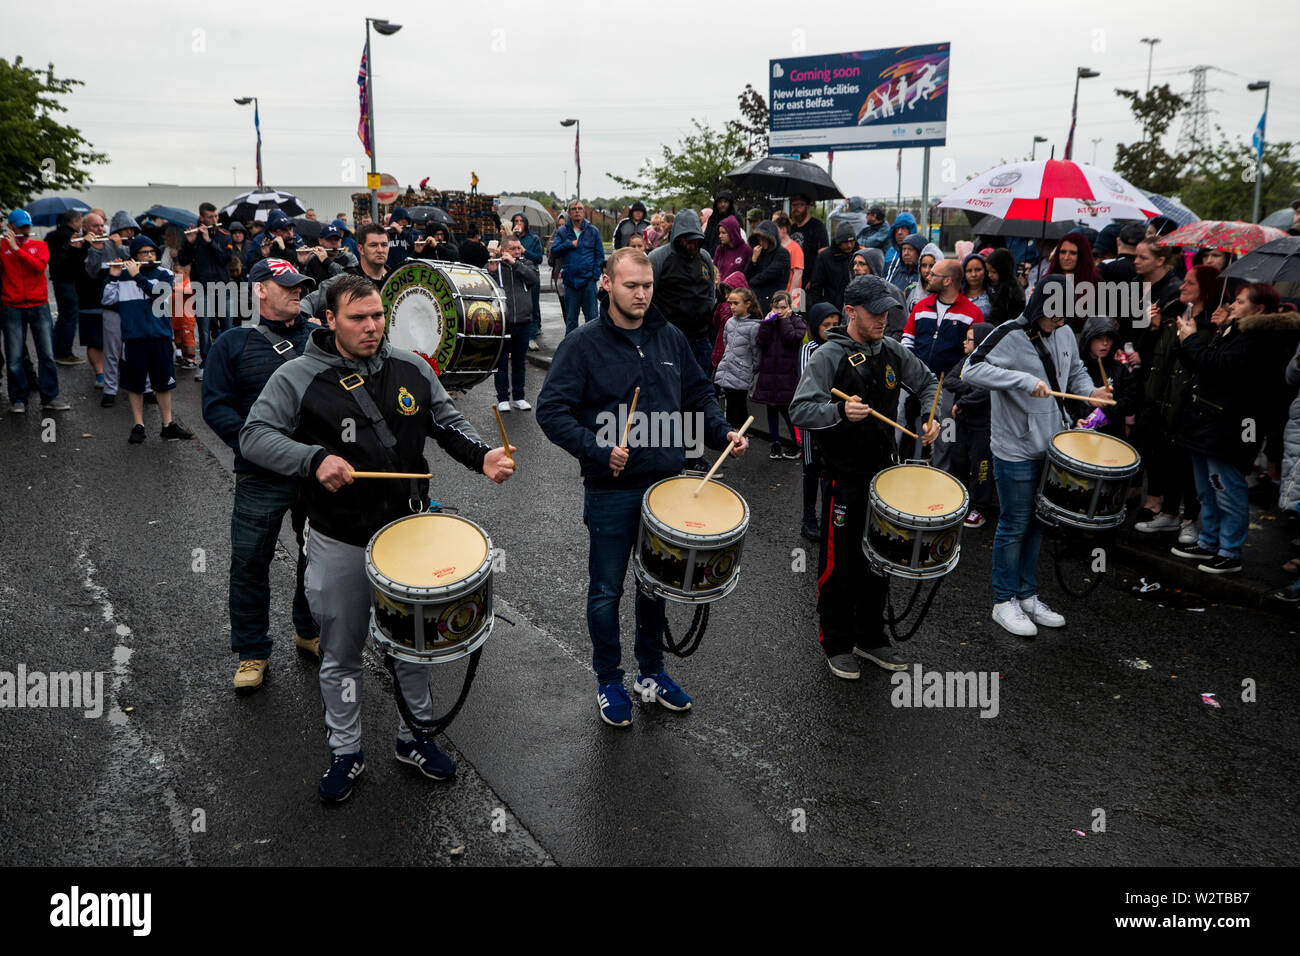 Bandsmen from the Rising Sons Flute Band play tunes at the site of the 11th night bonfire at Avoniel Leisure Centre in Dublin, Northern Ireland, as organisers host a “family fun day” after Belfast City Council reaffirmed its decision to remove materials from a bonfire site beside the centre. Stock Photo